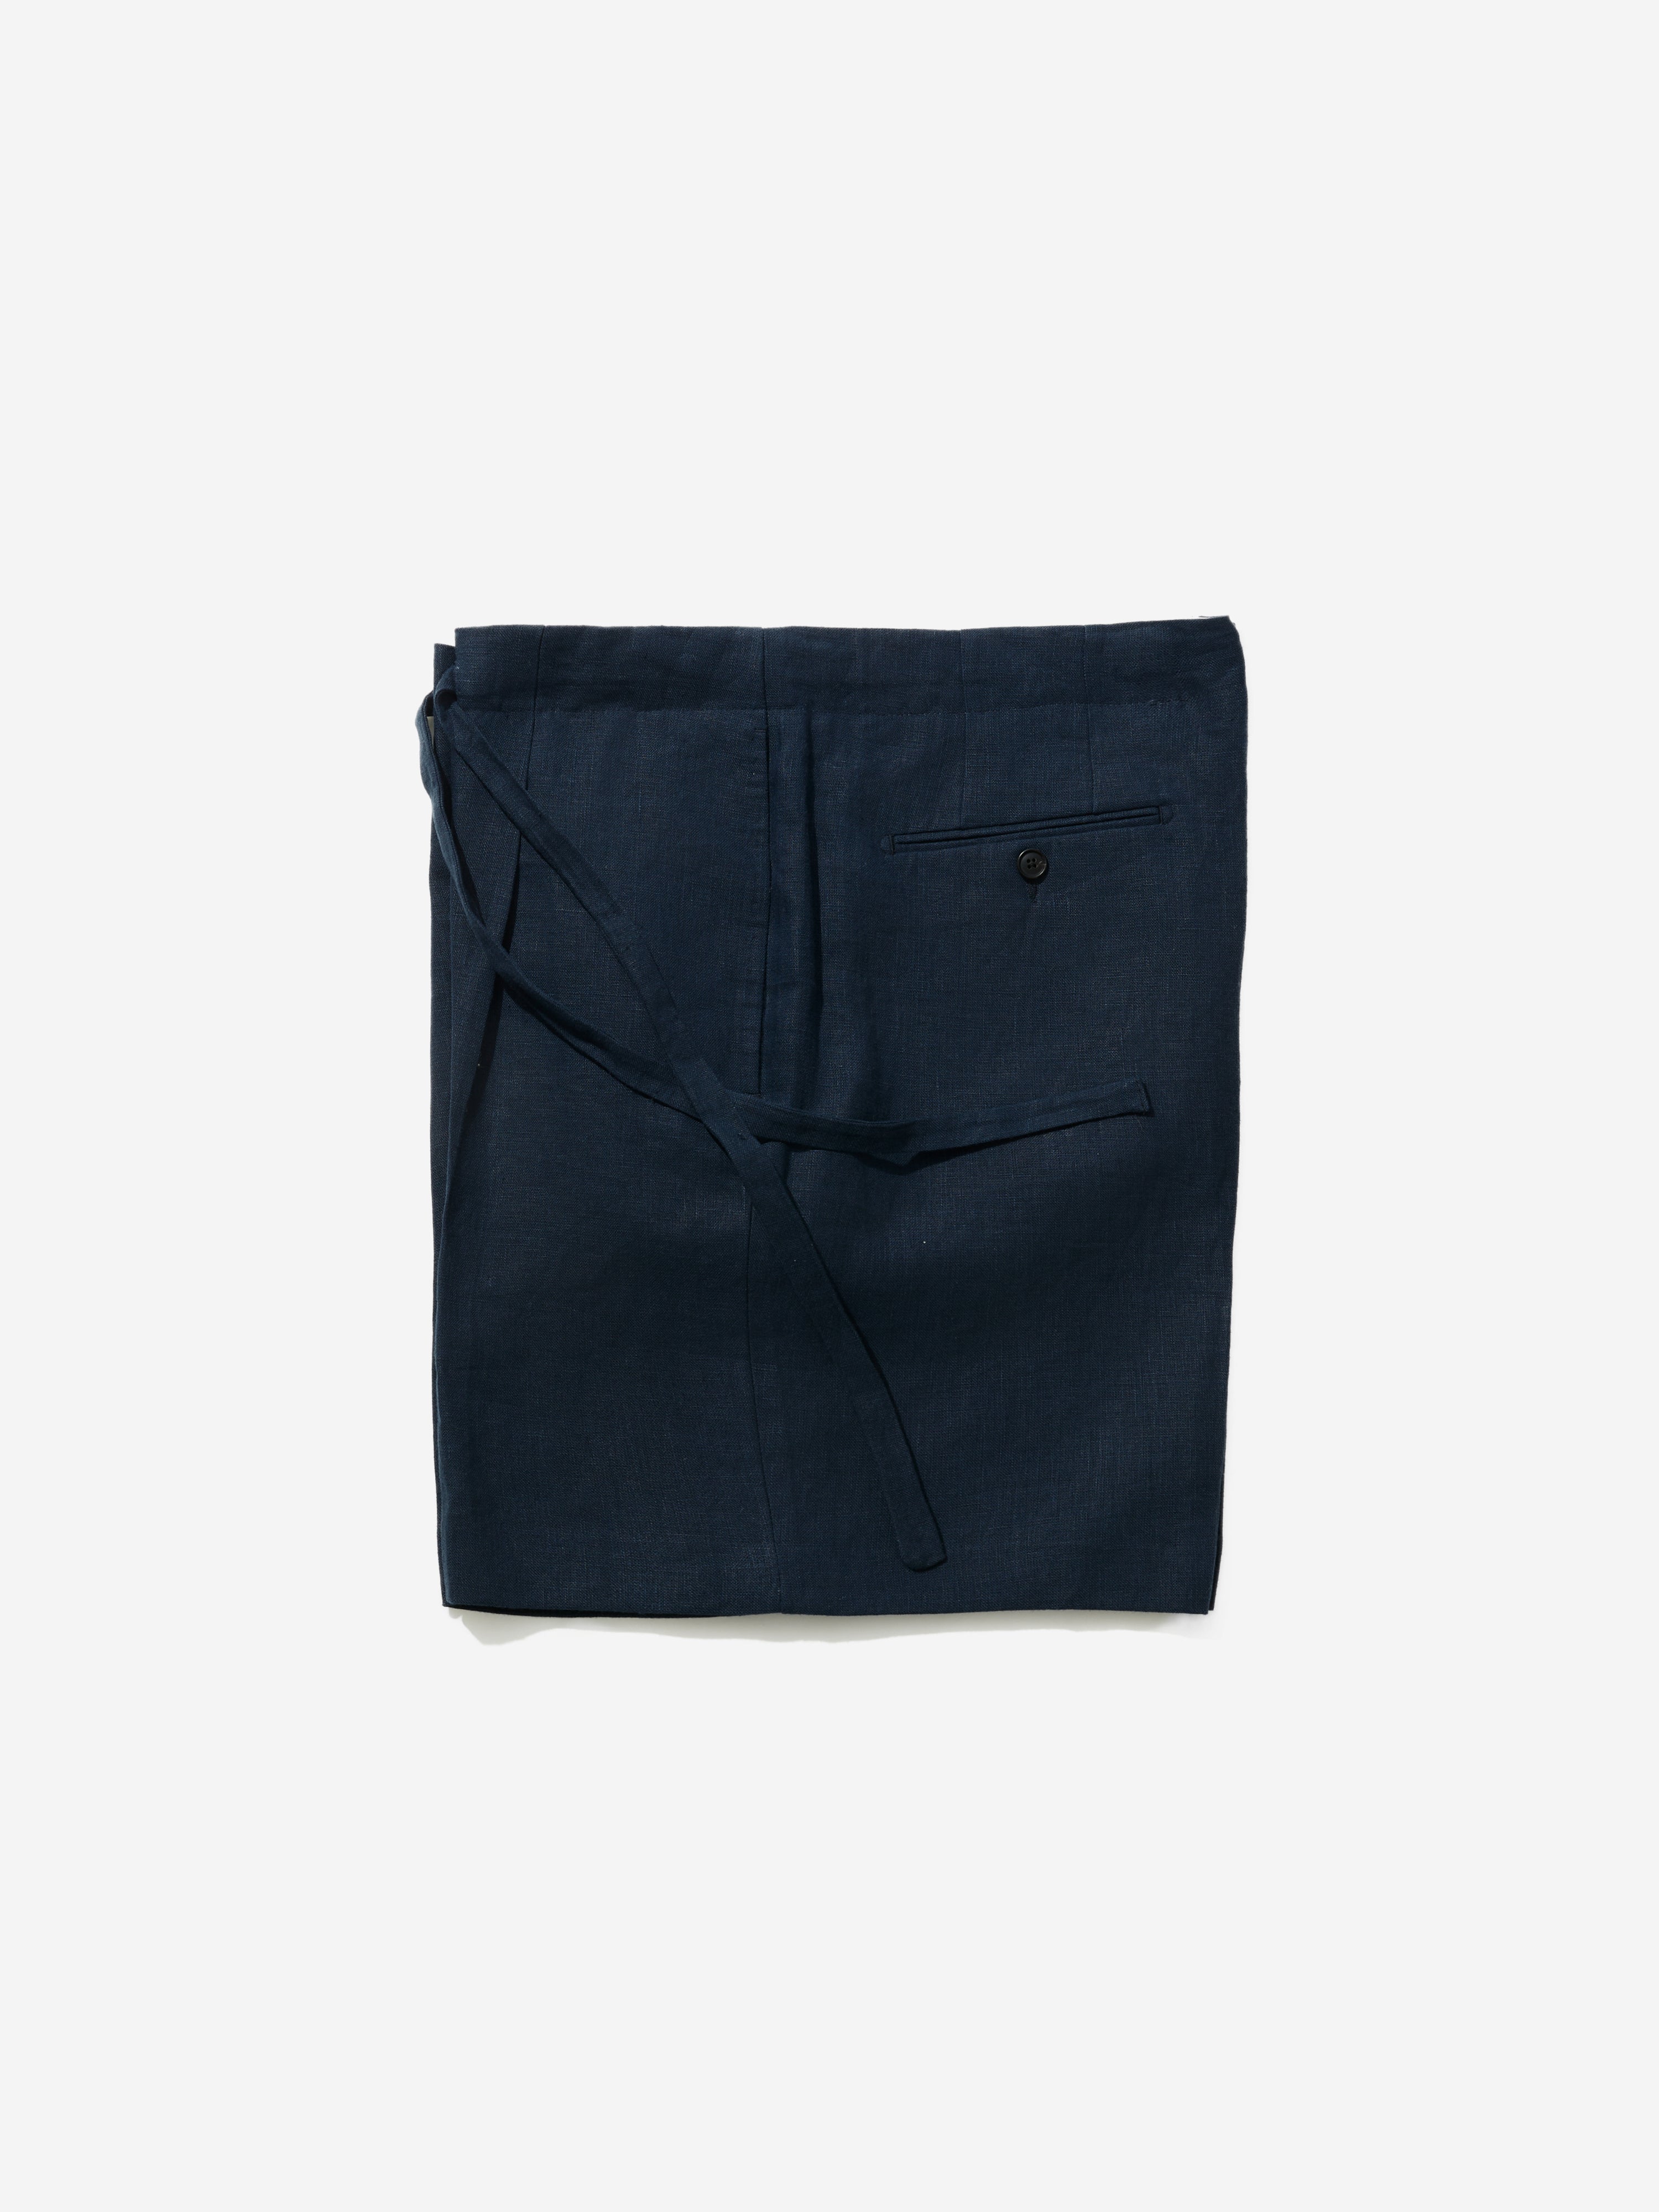 Navy Linen Drawstring Shorts (Wide Fit) - Grand Le Mar